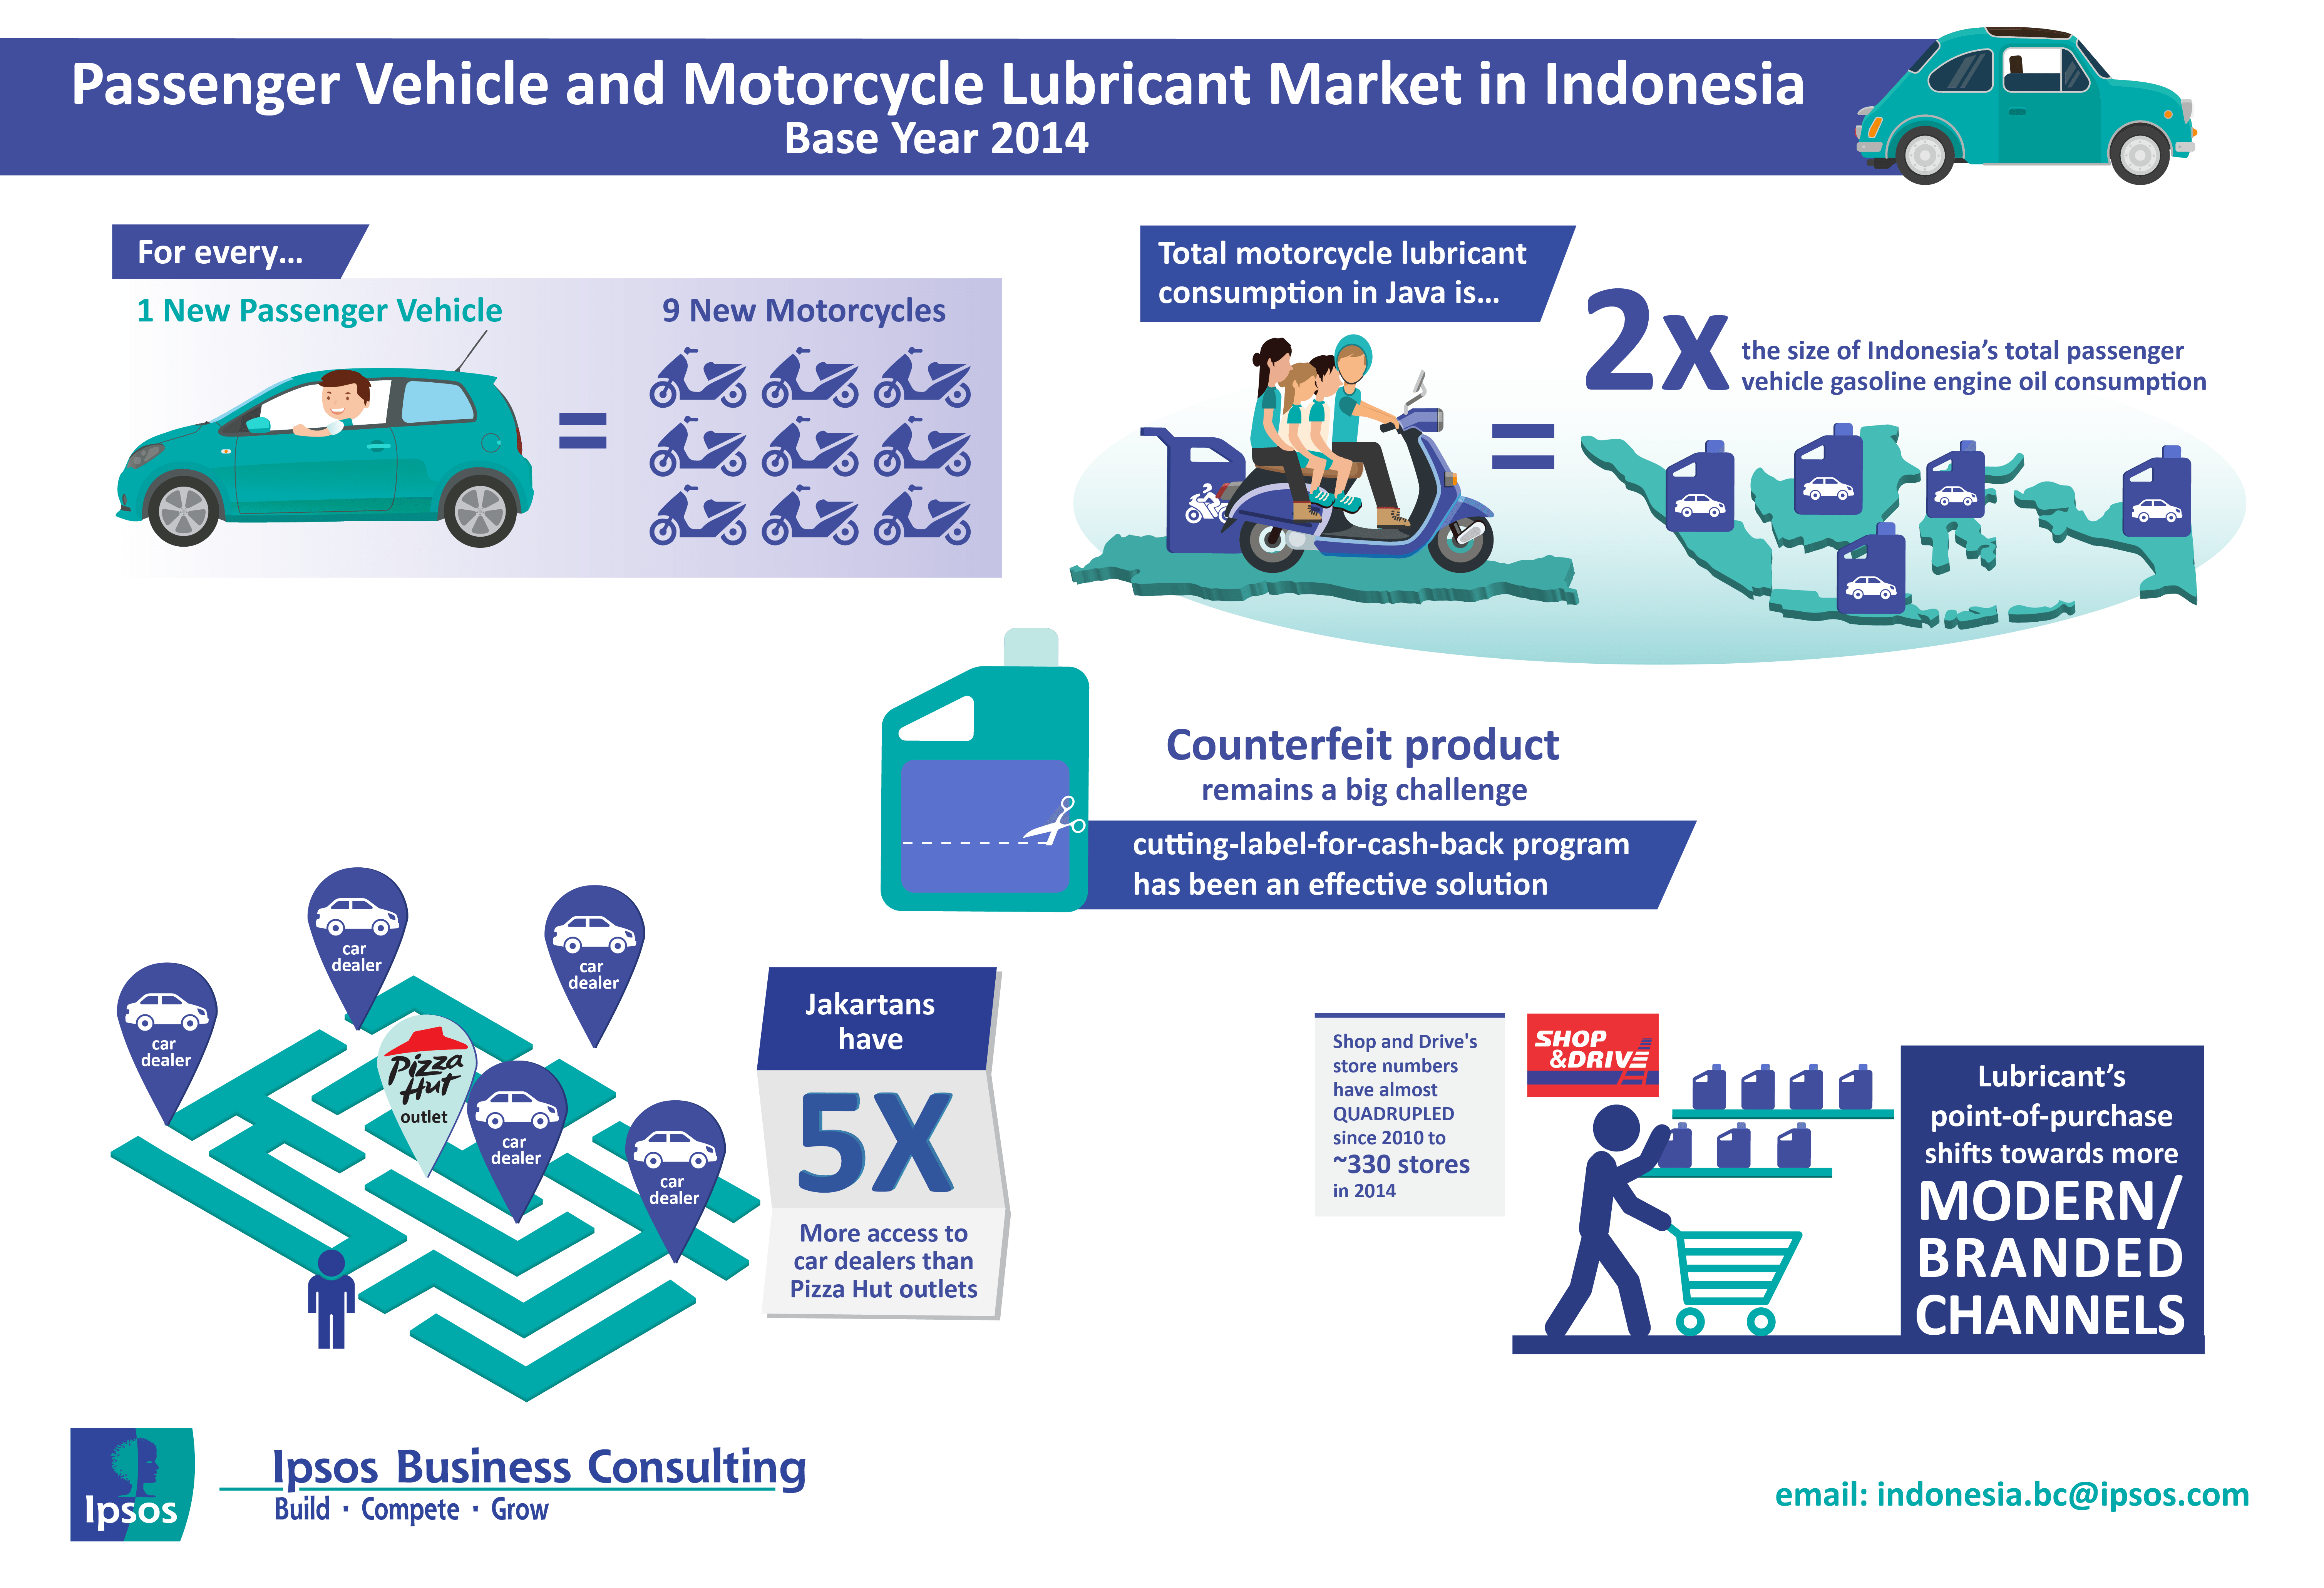 Passenger Vehicle and Motorcycle Lubricant Market in Indonesia